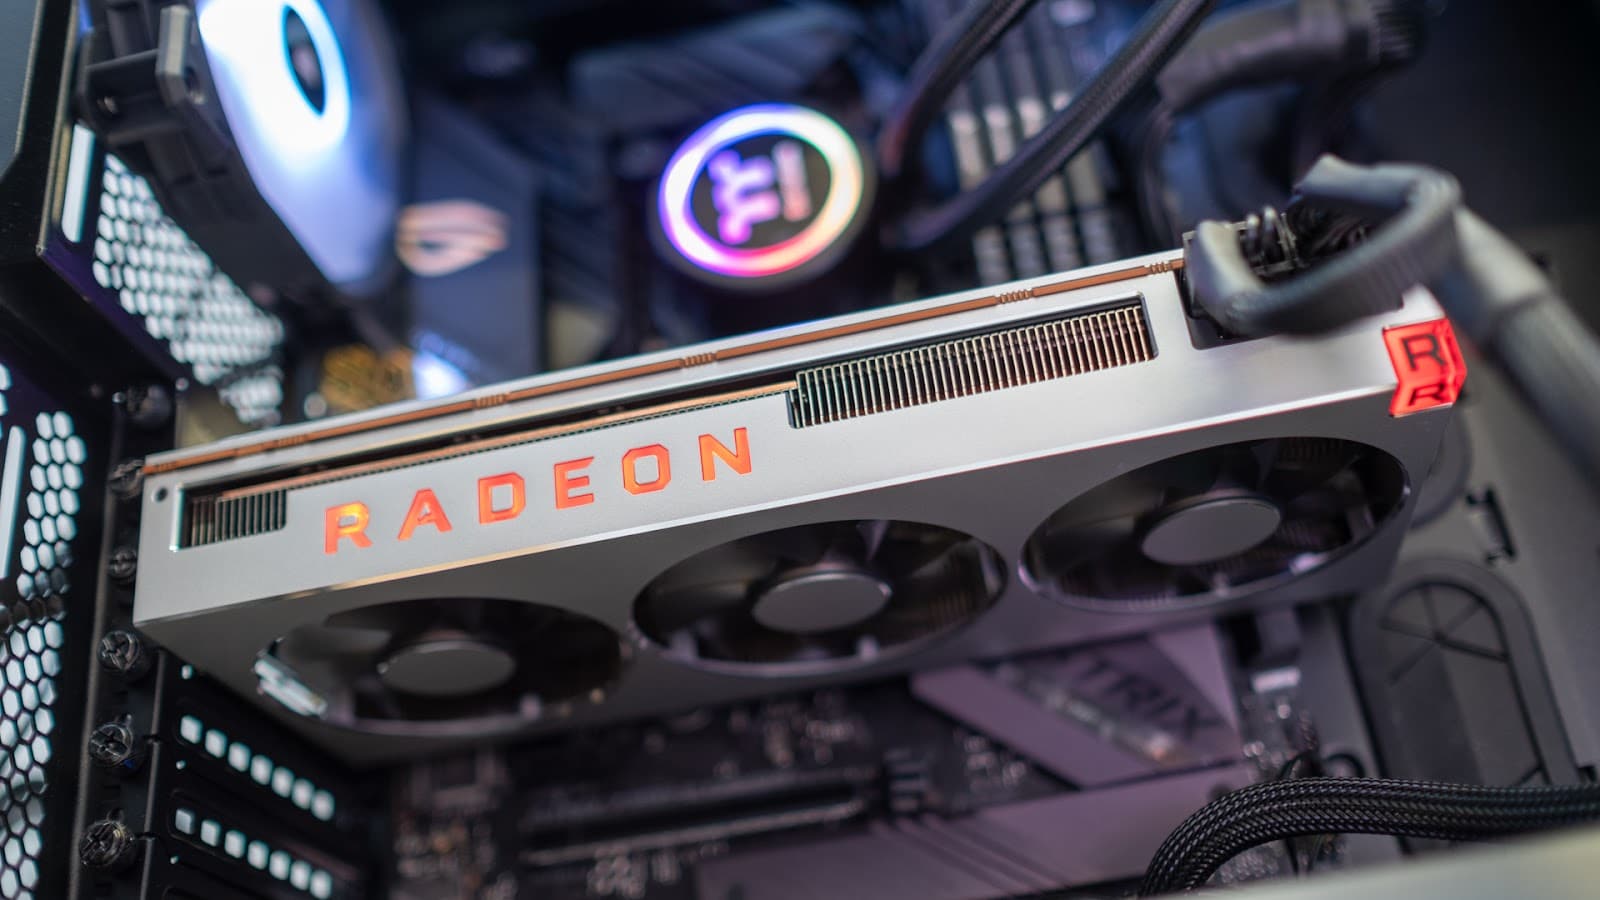 AMD Radeon VII was once the best graphics card for mining.